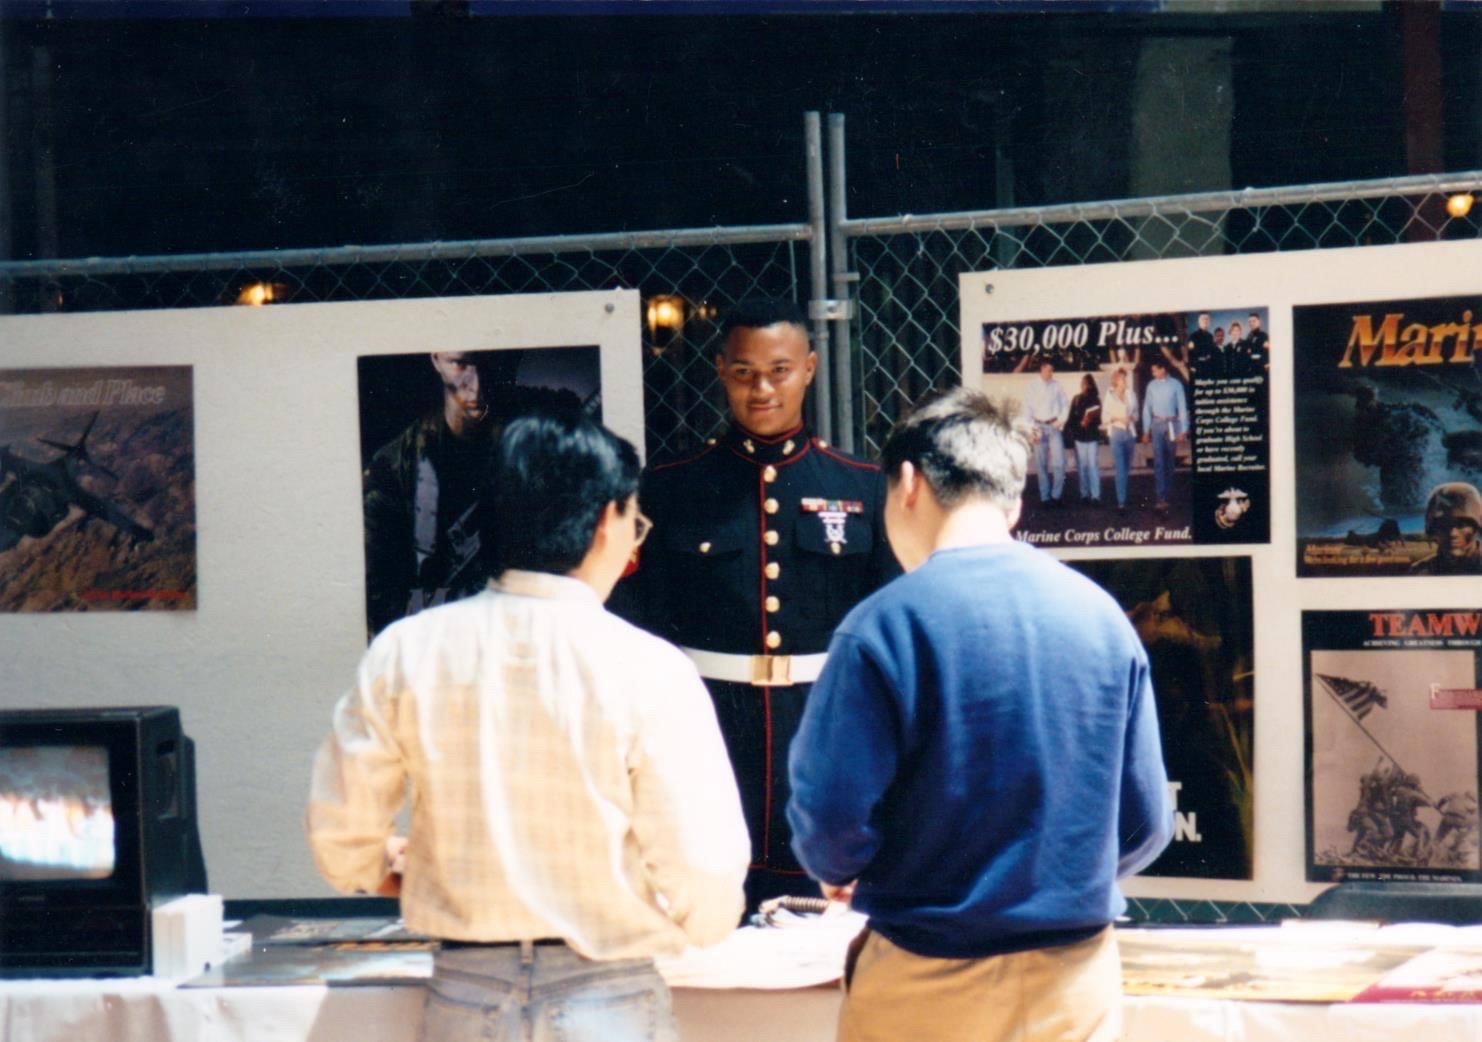 a veteral shares information with students during a fair